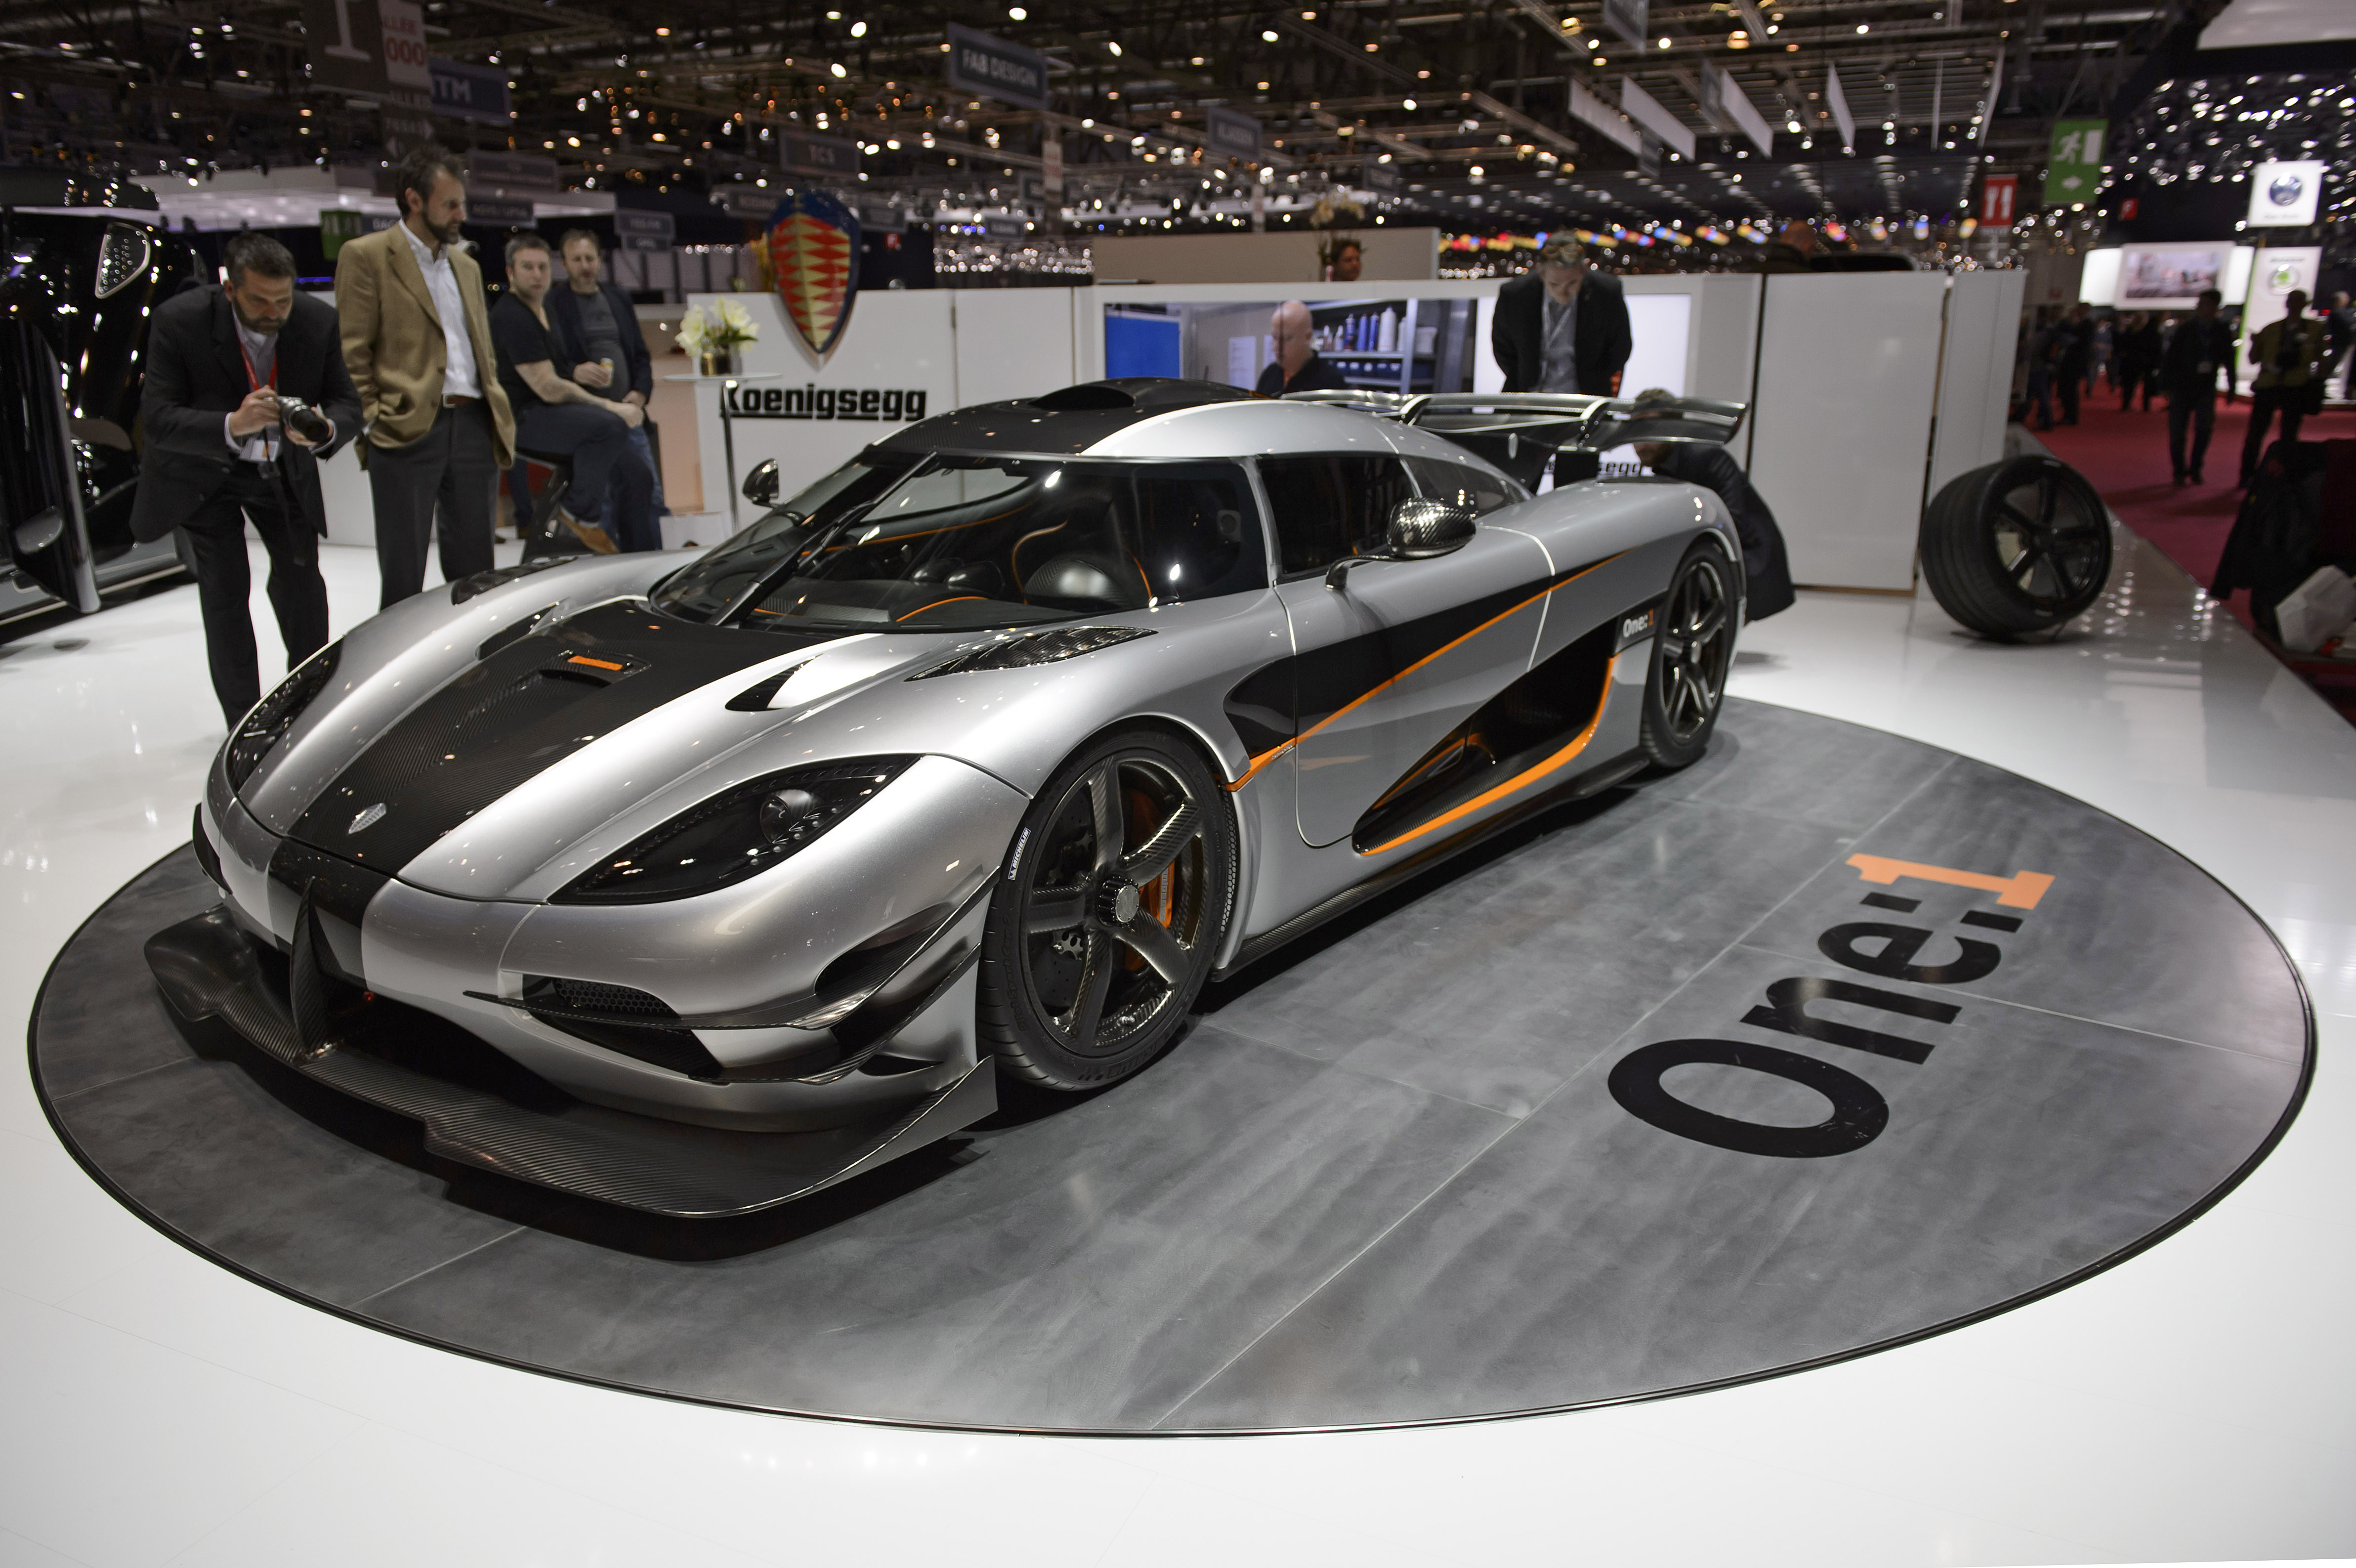 epa04109701 The new Koenigsegg One:1 is presented during the press day at the 84th Geneva International Motor Show in Geneva, Switzerland, 04 March 2014. The Motor Show opens its gates to the public from 06 to 16 March presenting more than 250 exhibitors and more than 146 world and European premieres. EPA/MARTIAL TREZZINI